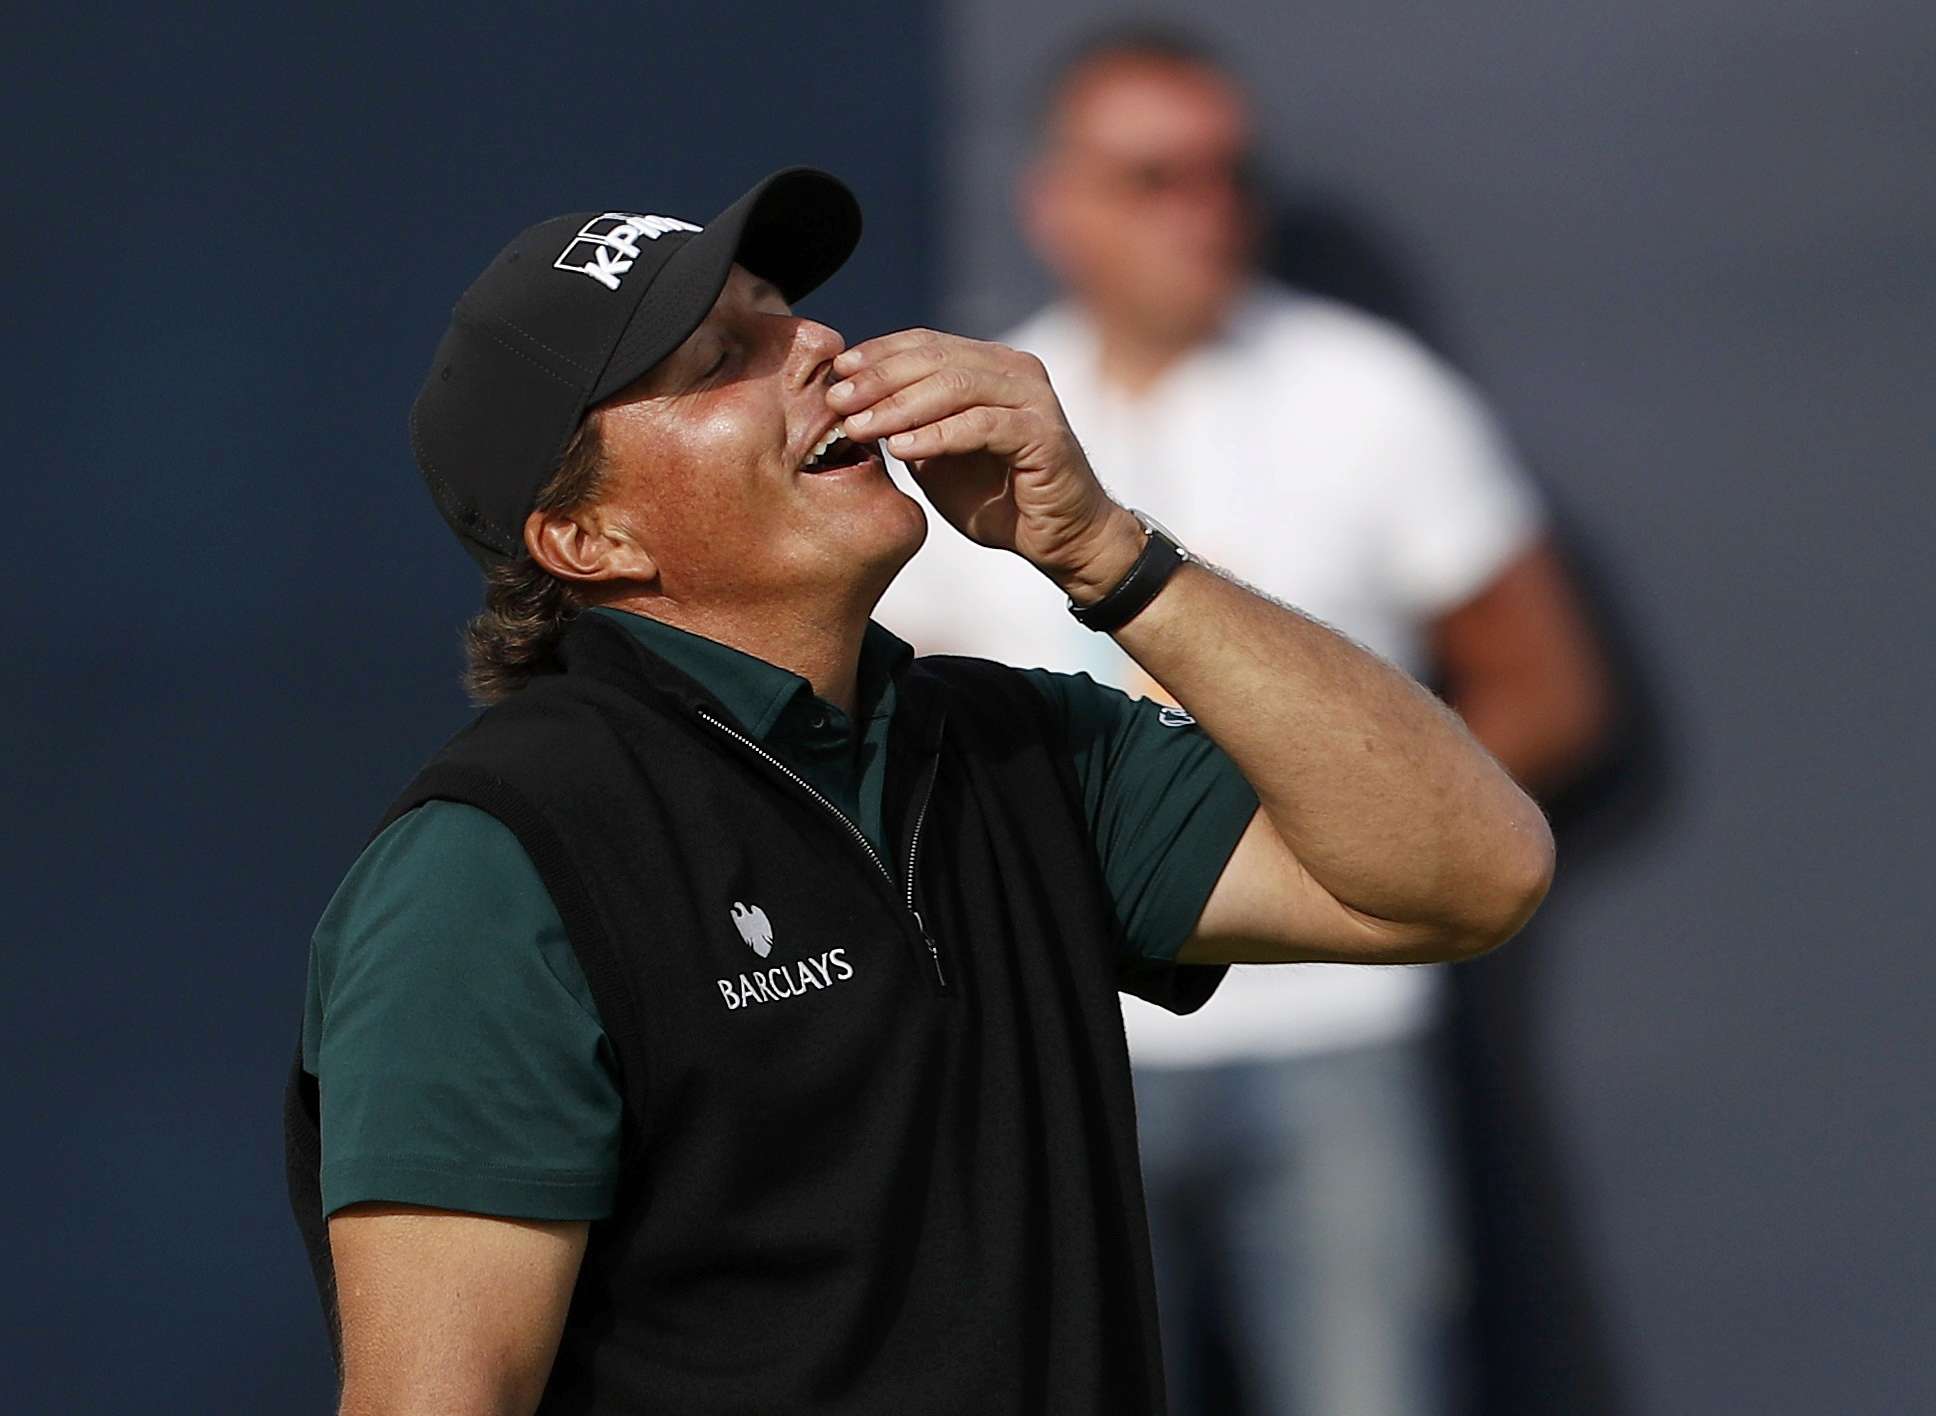 Phil Mickelson reacts after missing a birdie putt on the 18th green that would have broken a majors scoring record. Photo: Reuters